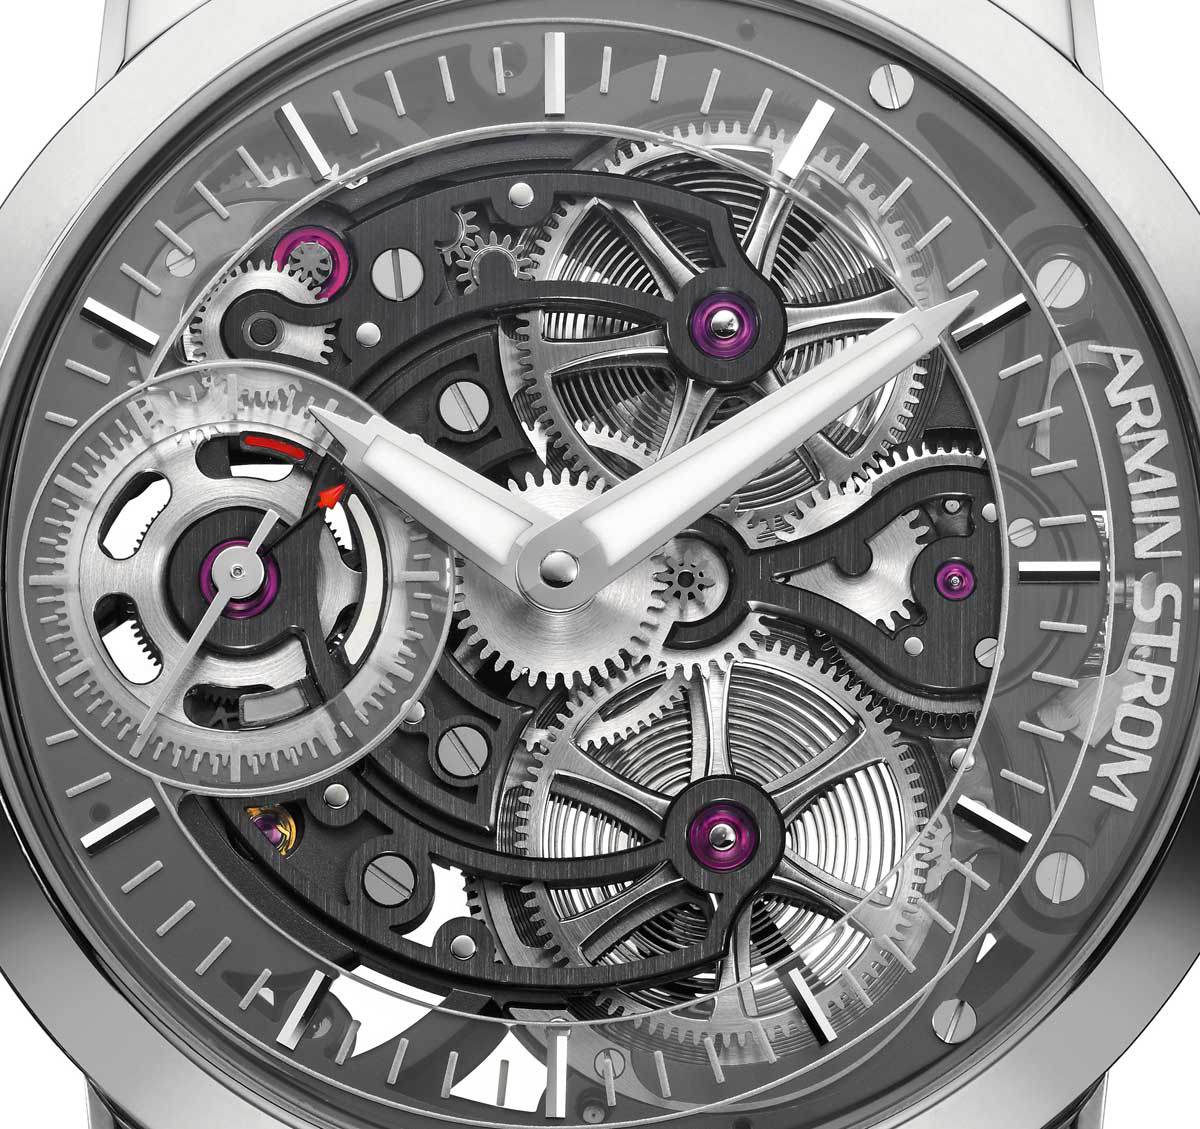 Armin Strom Skeleton Pure - Only Watch 2015 